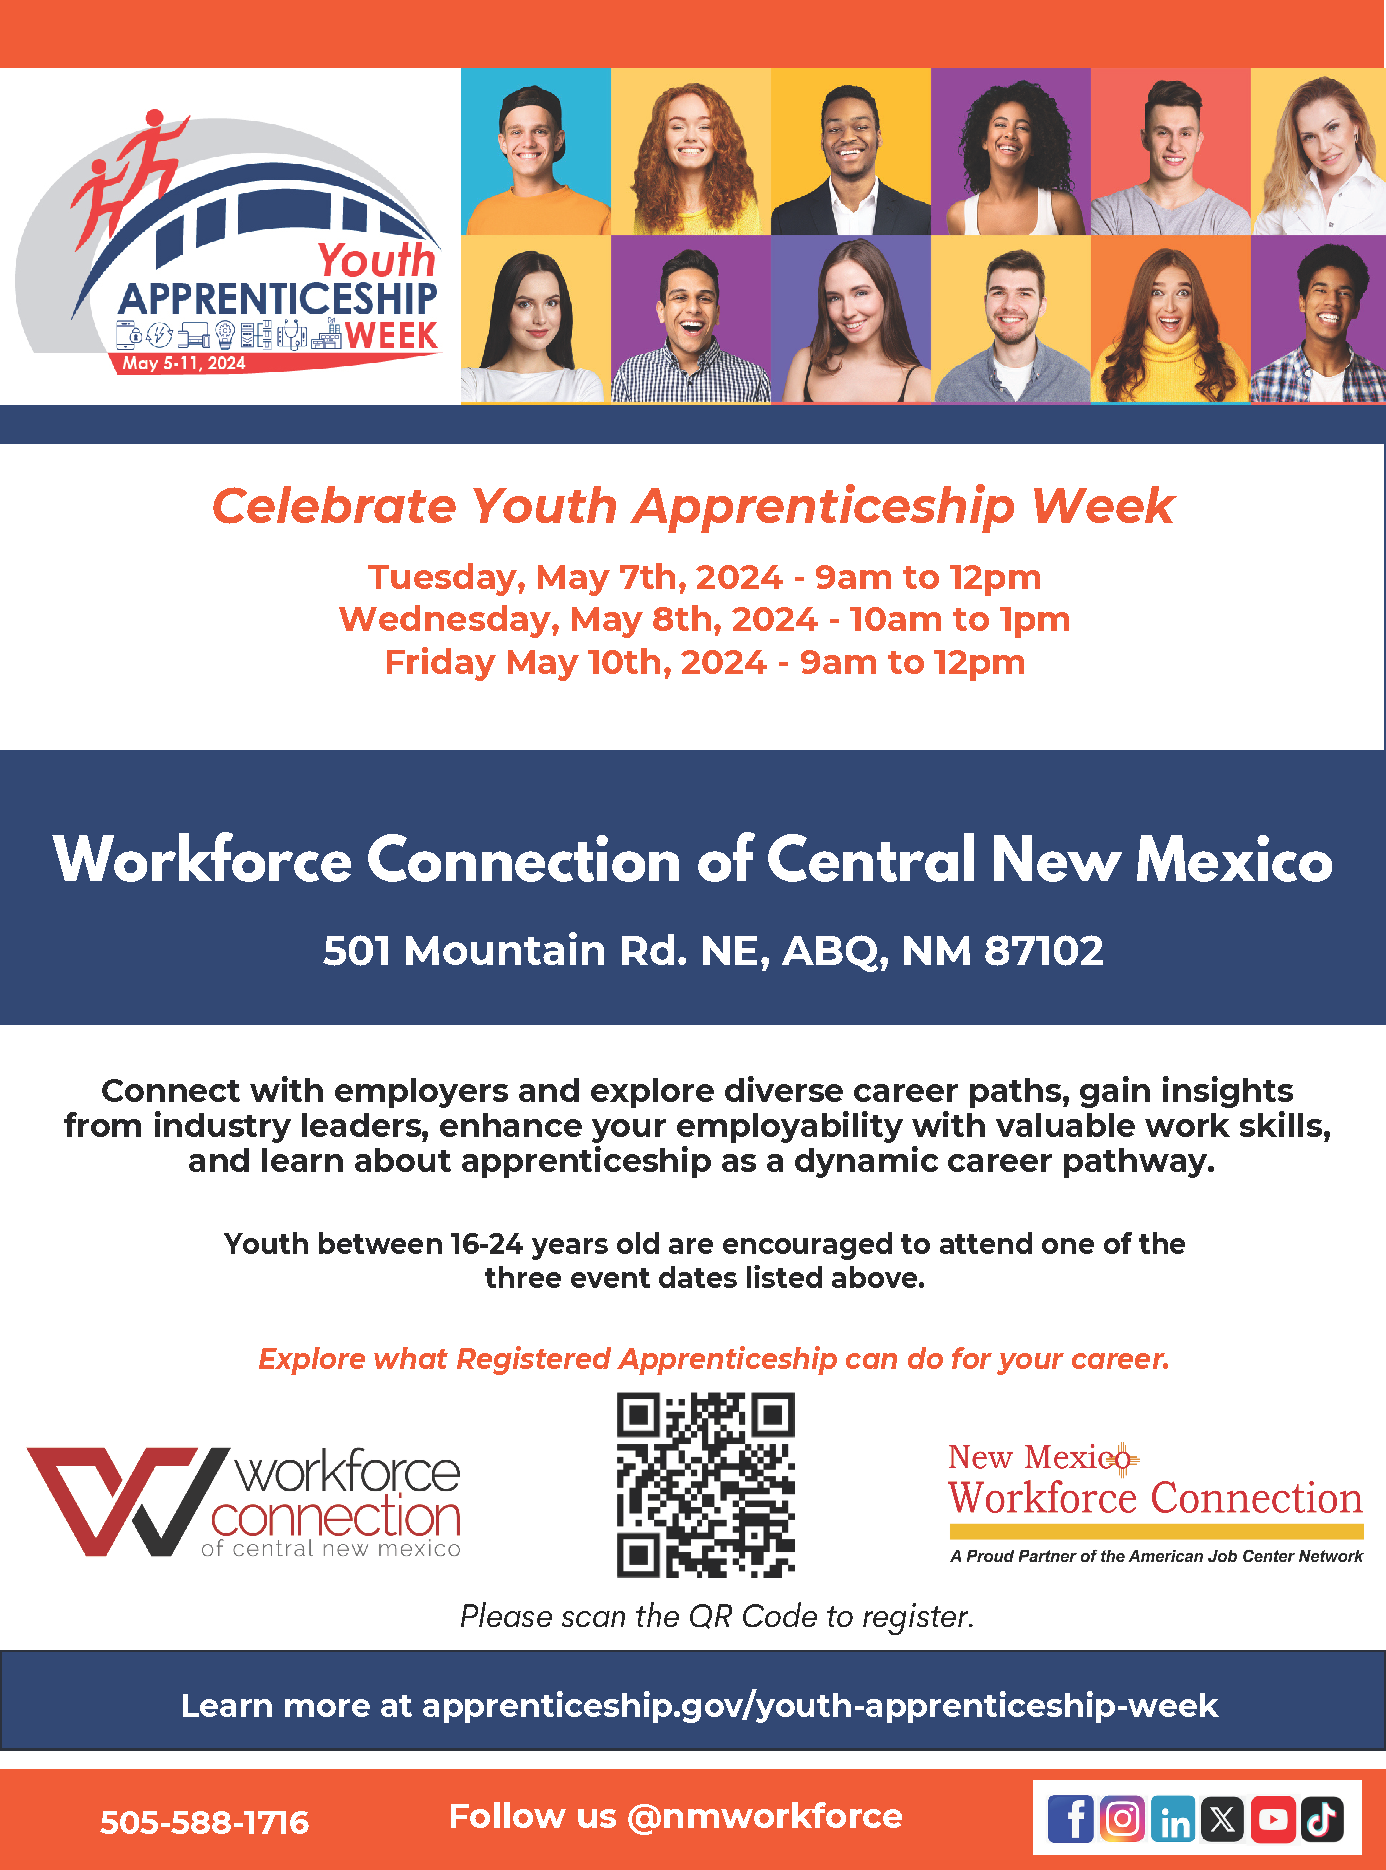 Youth Apprenticeship Week - Workforce Connection of Central New Mexico